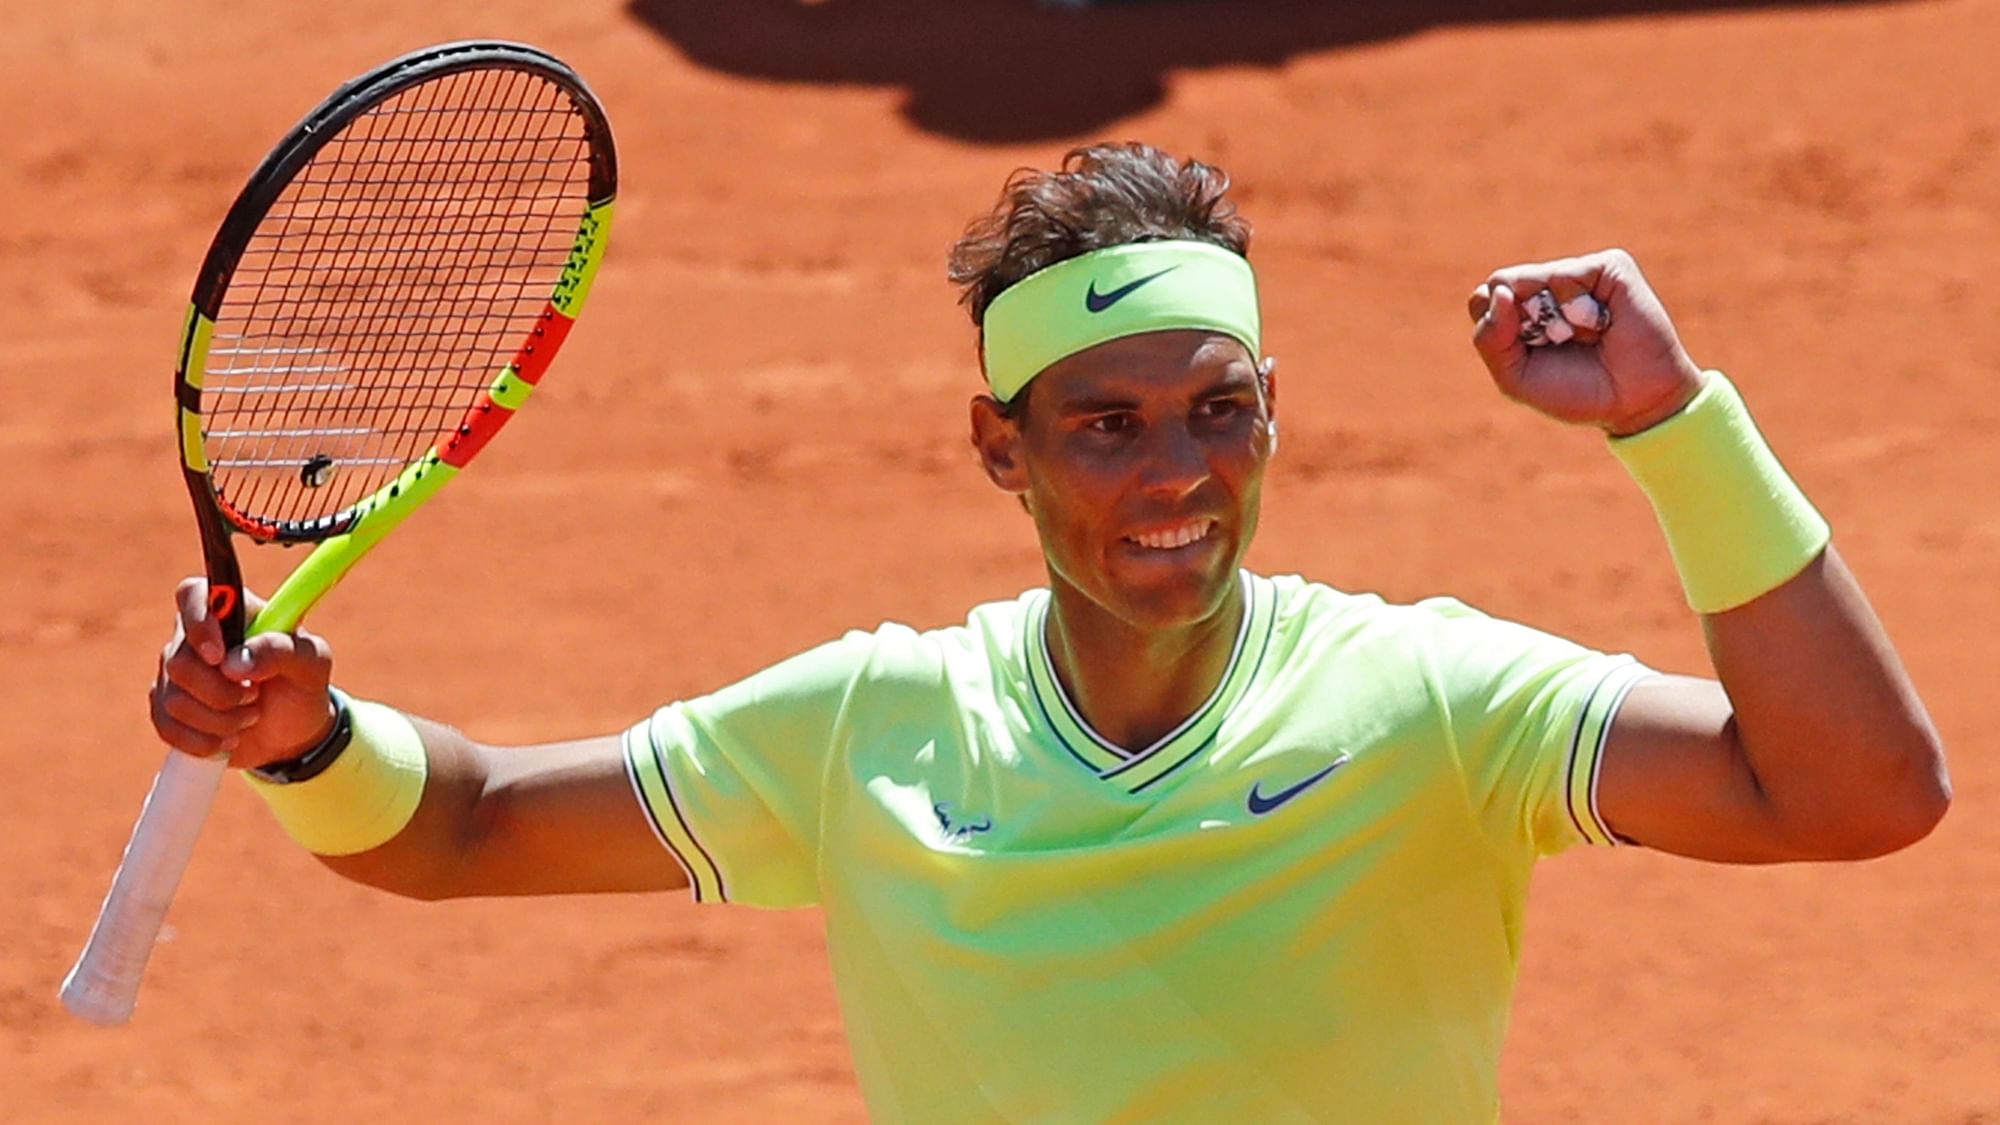 Rafael Nadal defeated Roger Federer 6-3, 6-4, 6-2 to enter his 12th final of the French Open.